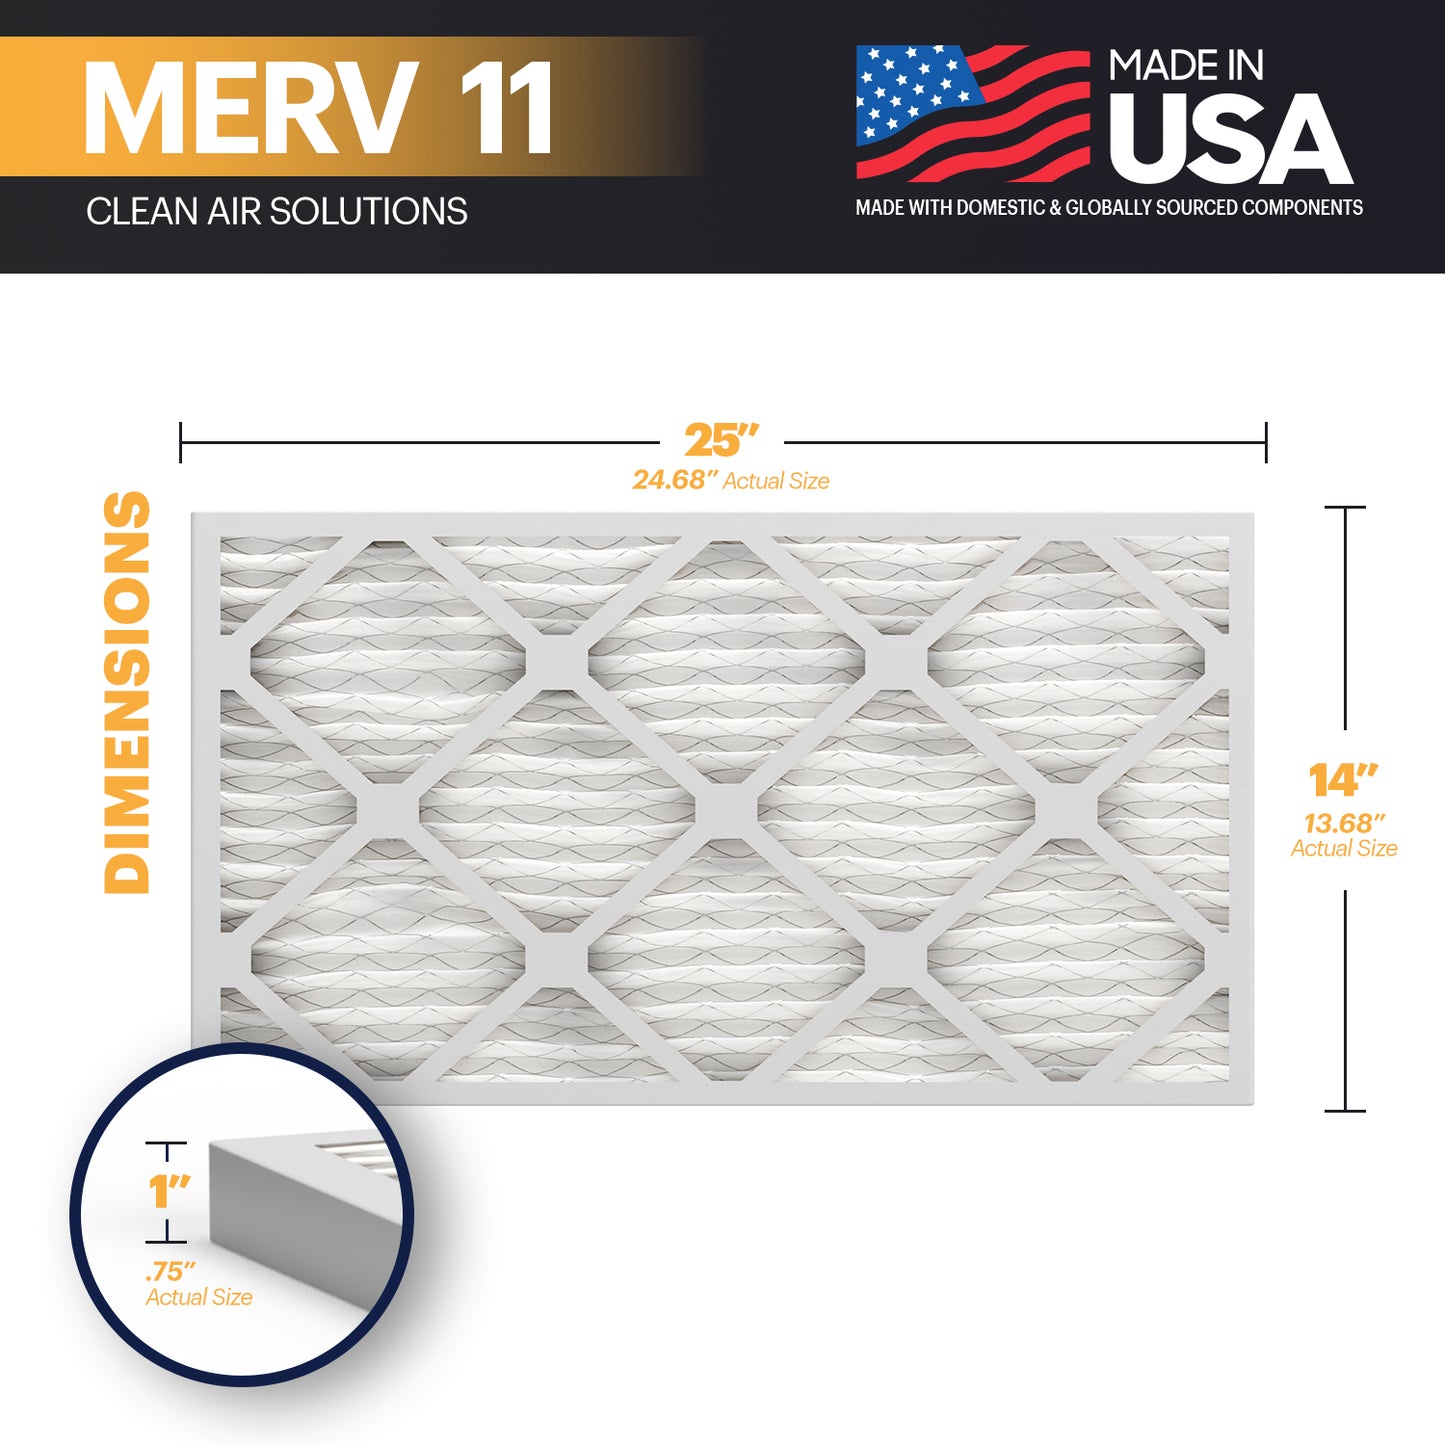 BNX TruFilter 14x25x1 Air Filter MERV 11 (6-Pack) - MADE IN USA - Allergen Defense Electrostatic Pleated Air Conditioner HVAC AC Furnace Filters for Allergies, Dust, Pet, Smoke, Allergy MPR 1200 FPR 7